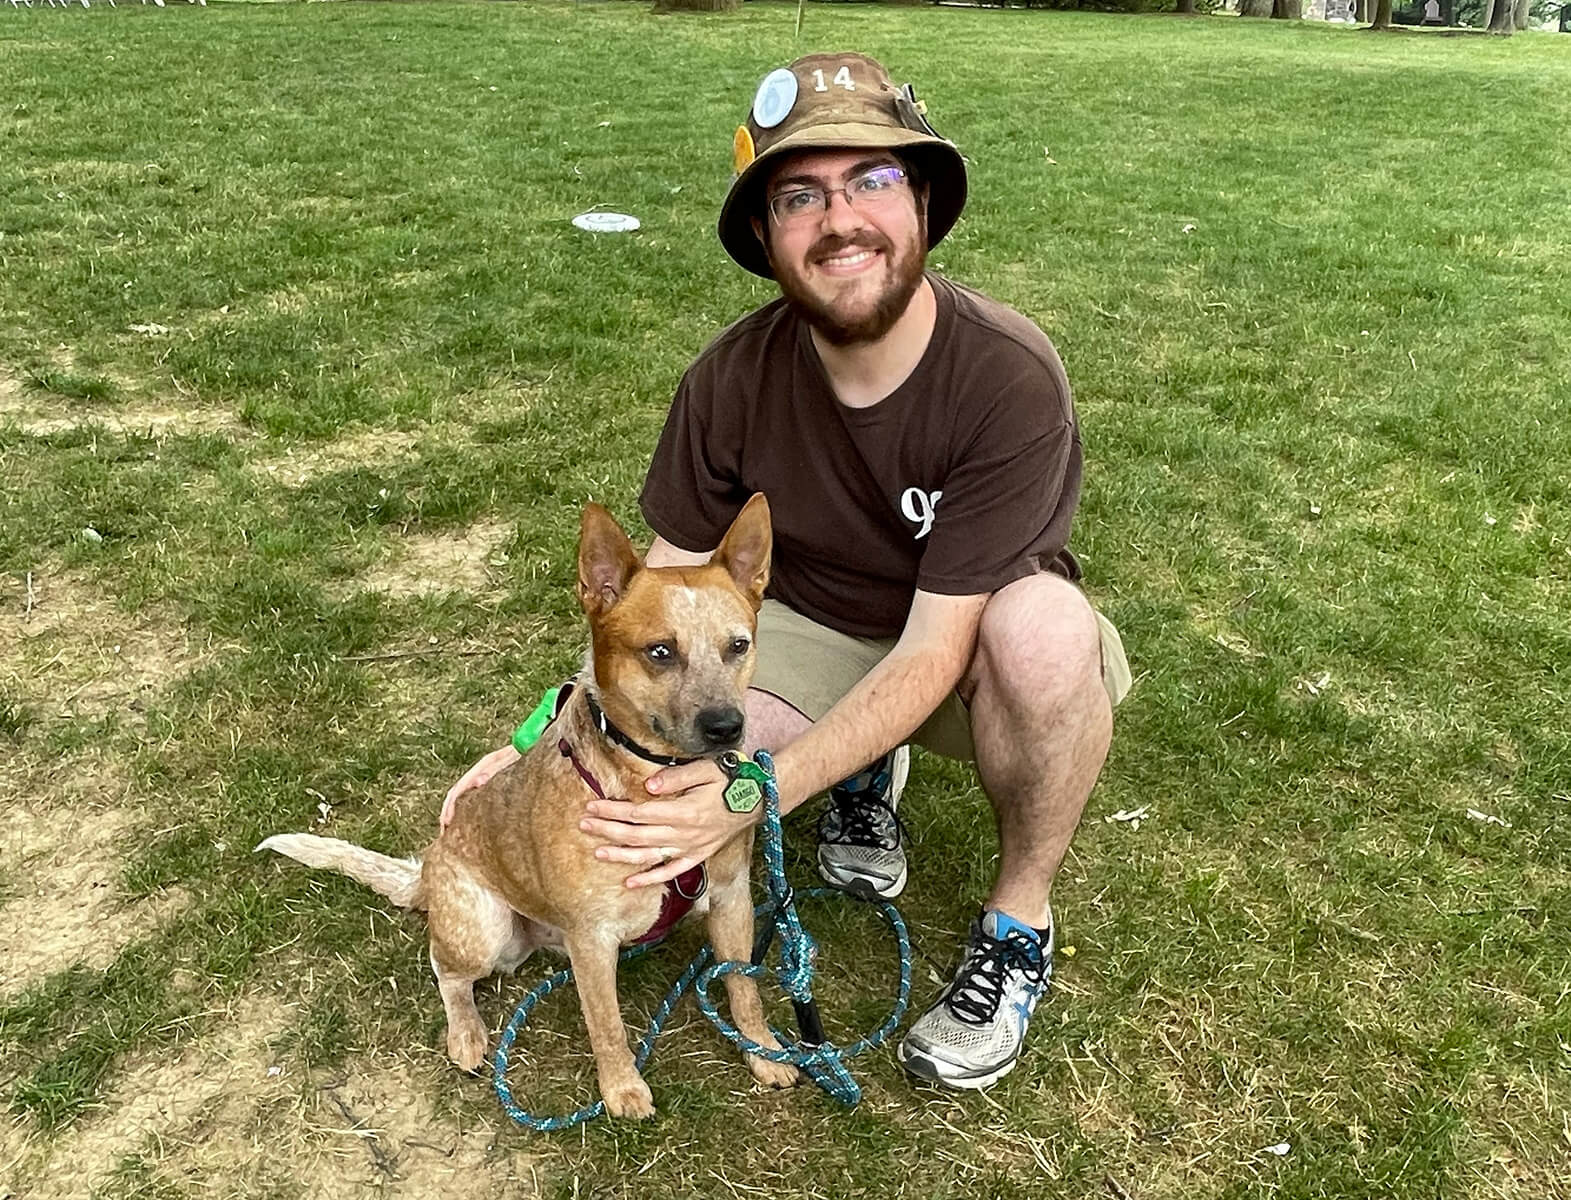 Alumnus wearing a brown t-shirt and bucket hat kneels on the grass beside a sandy colored dog at Reunion 2023.